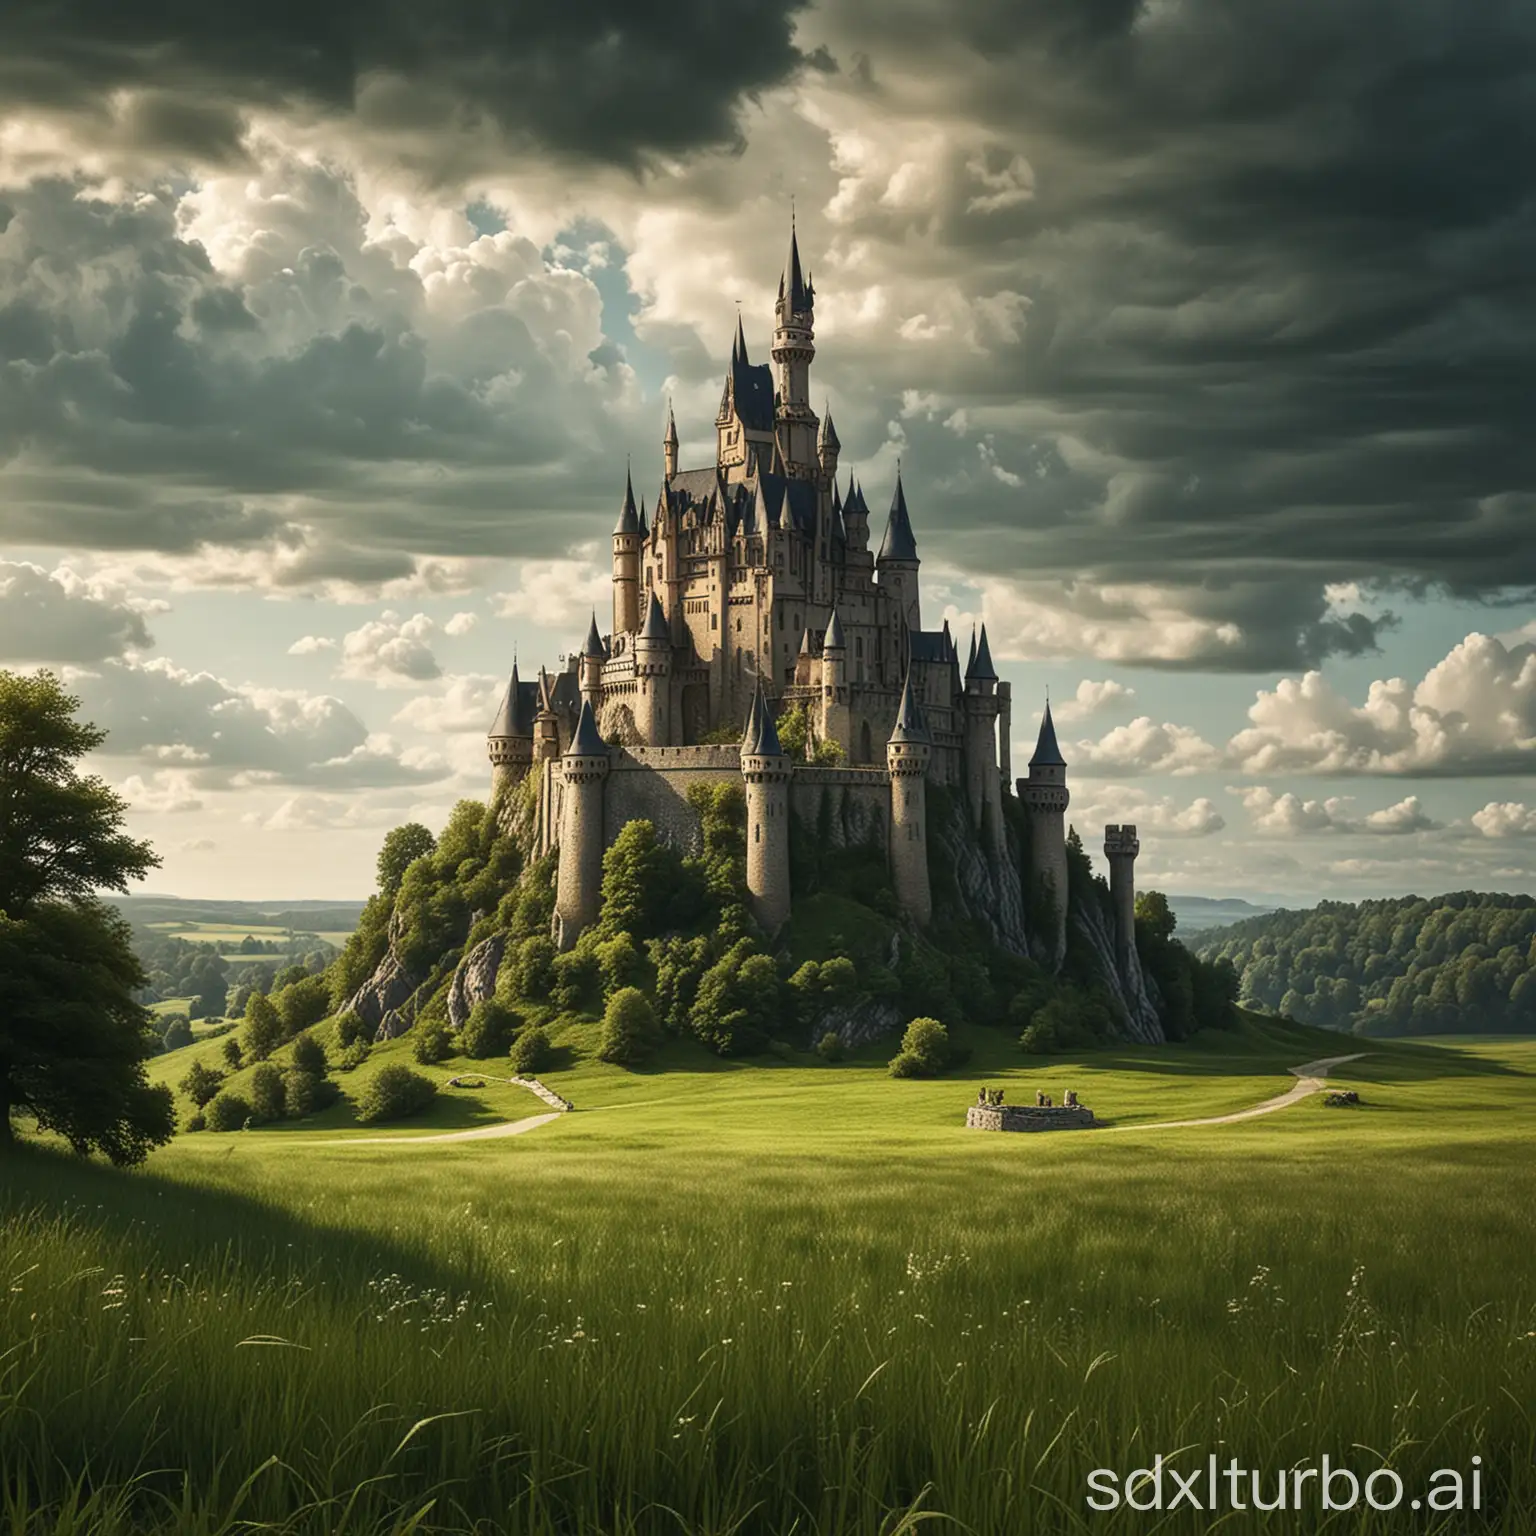 I want a landscape outdoors with a castle in the background and an area in front of flat grass